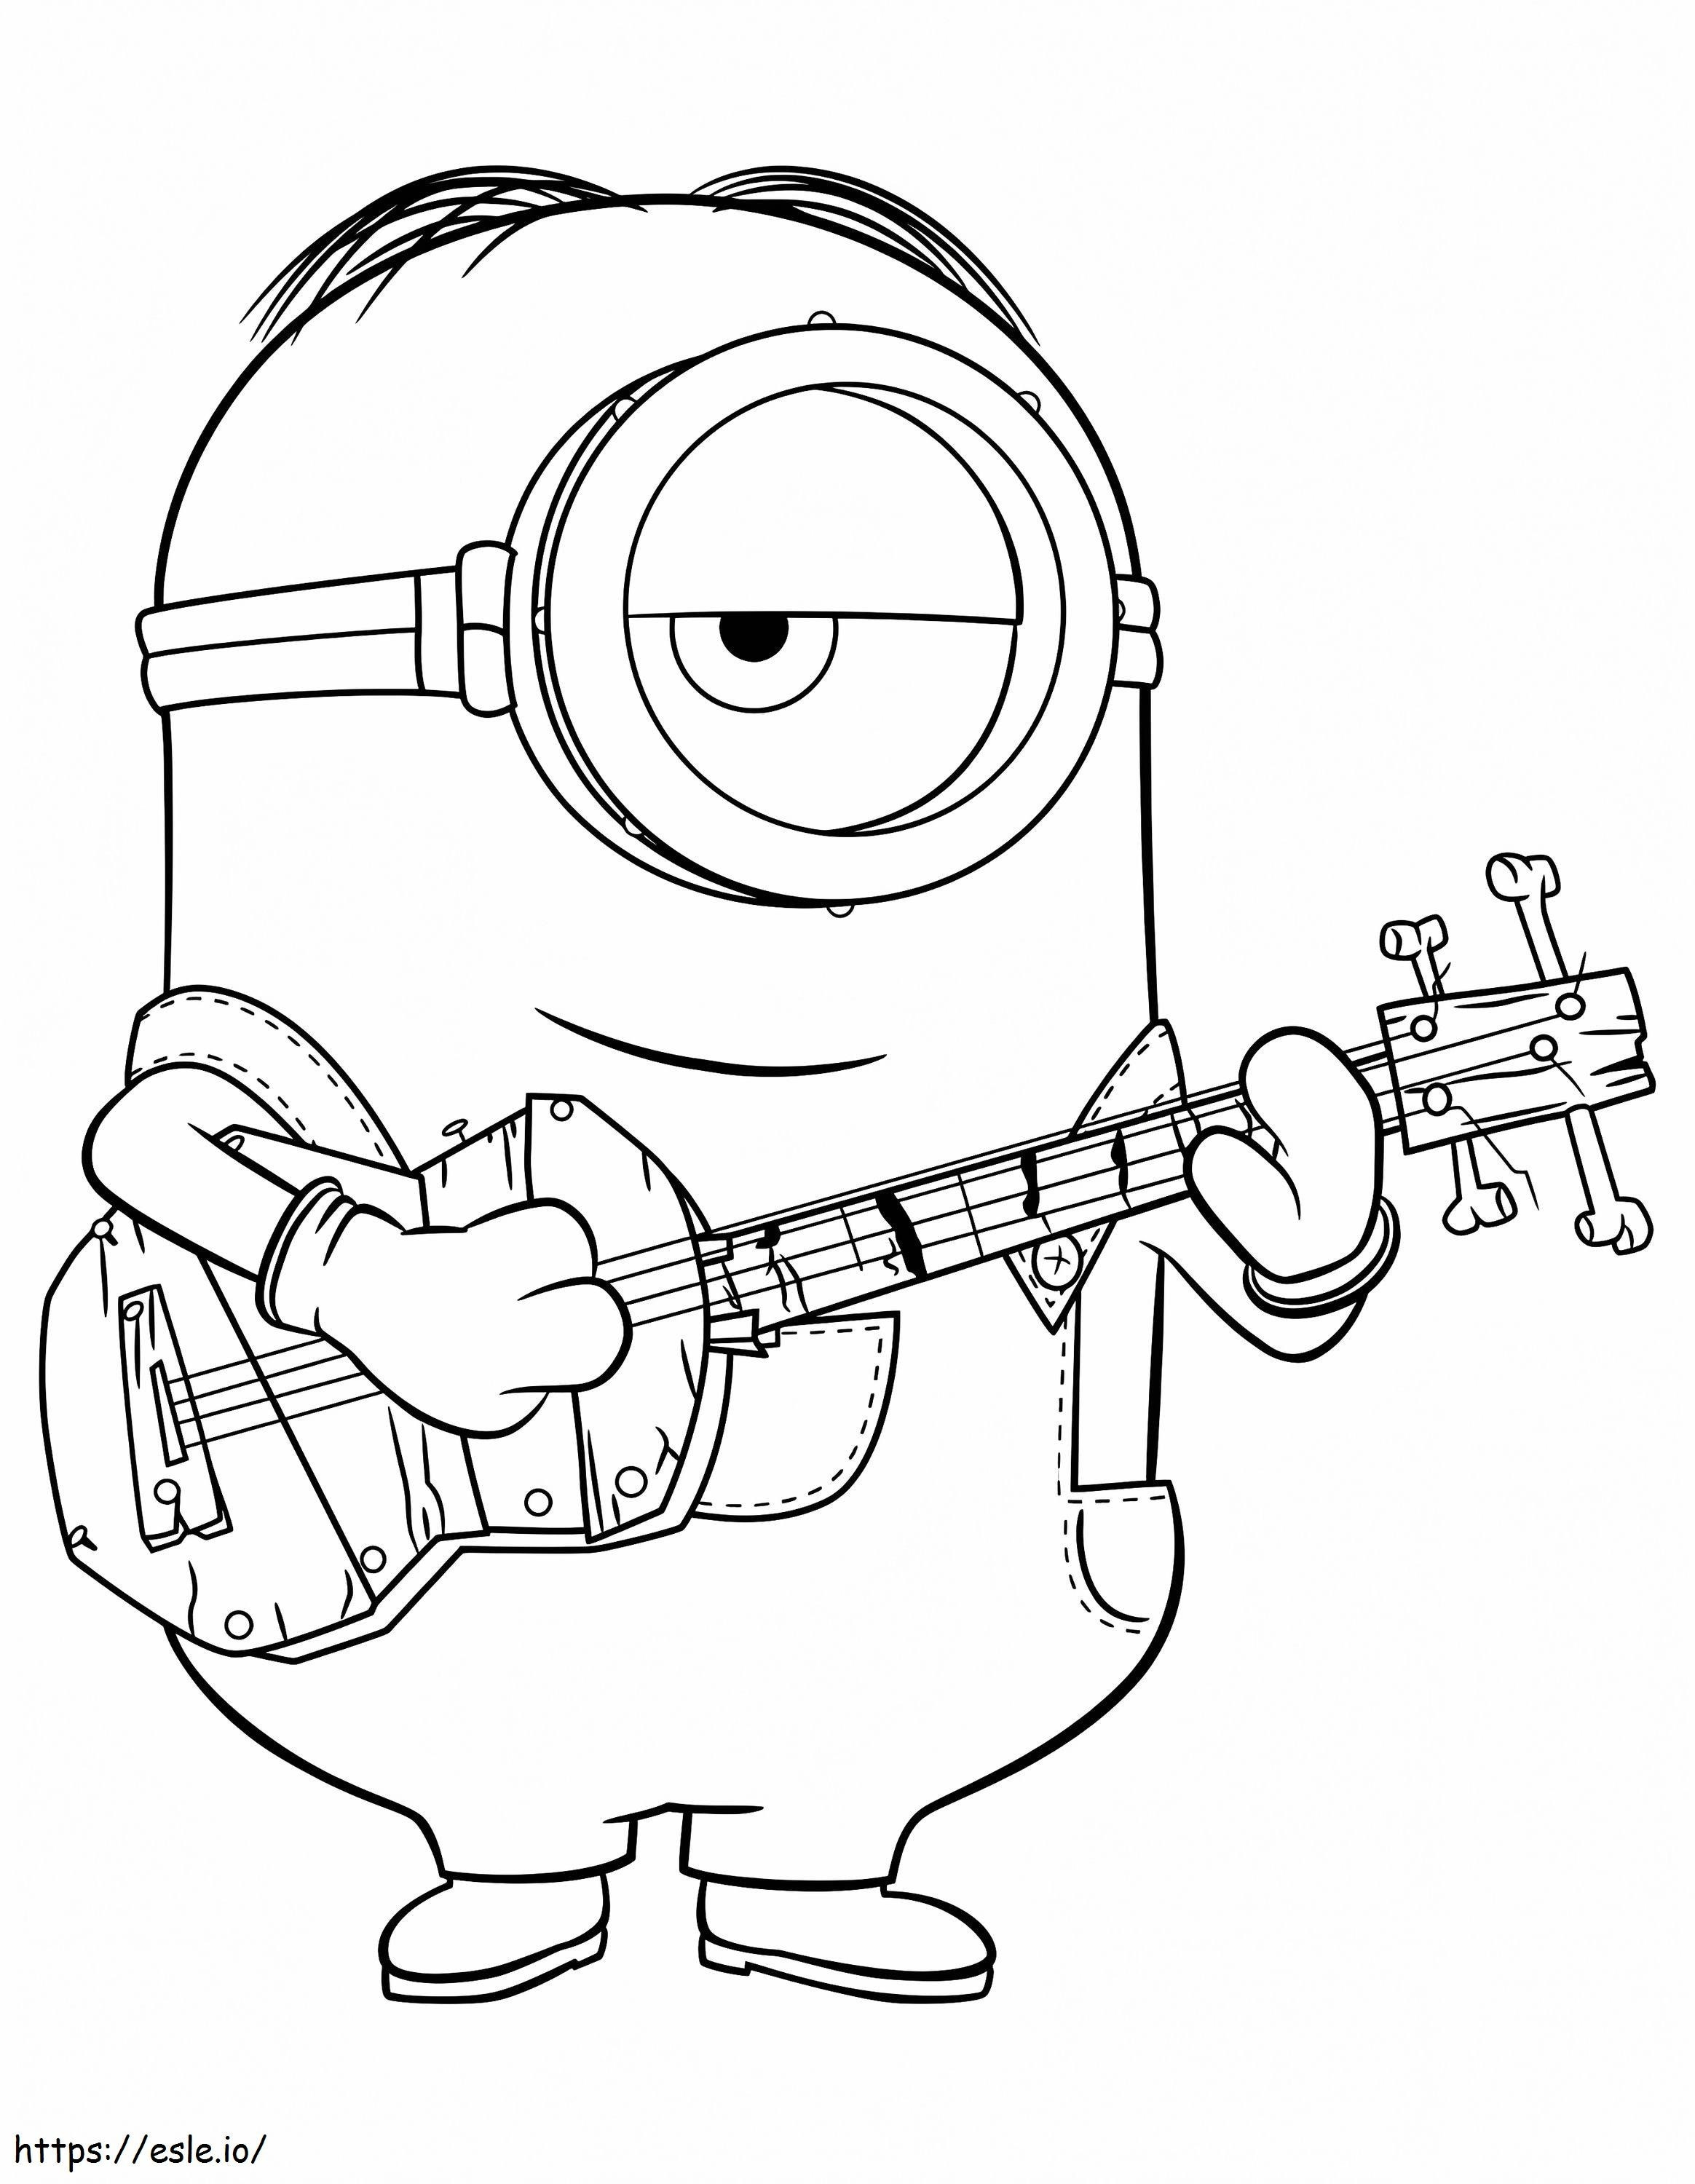 1531709456 Stuart Playing Guitar A4 coloring page